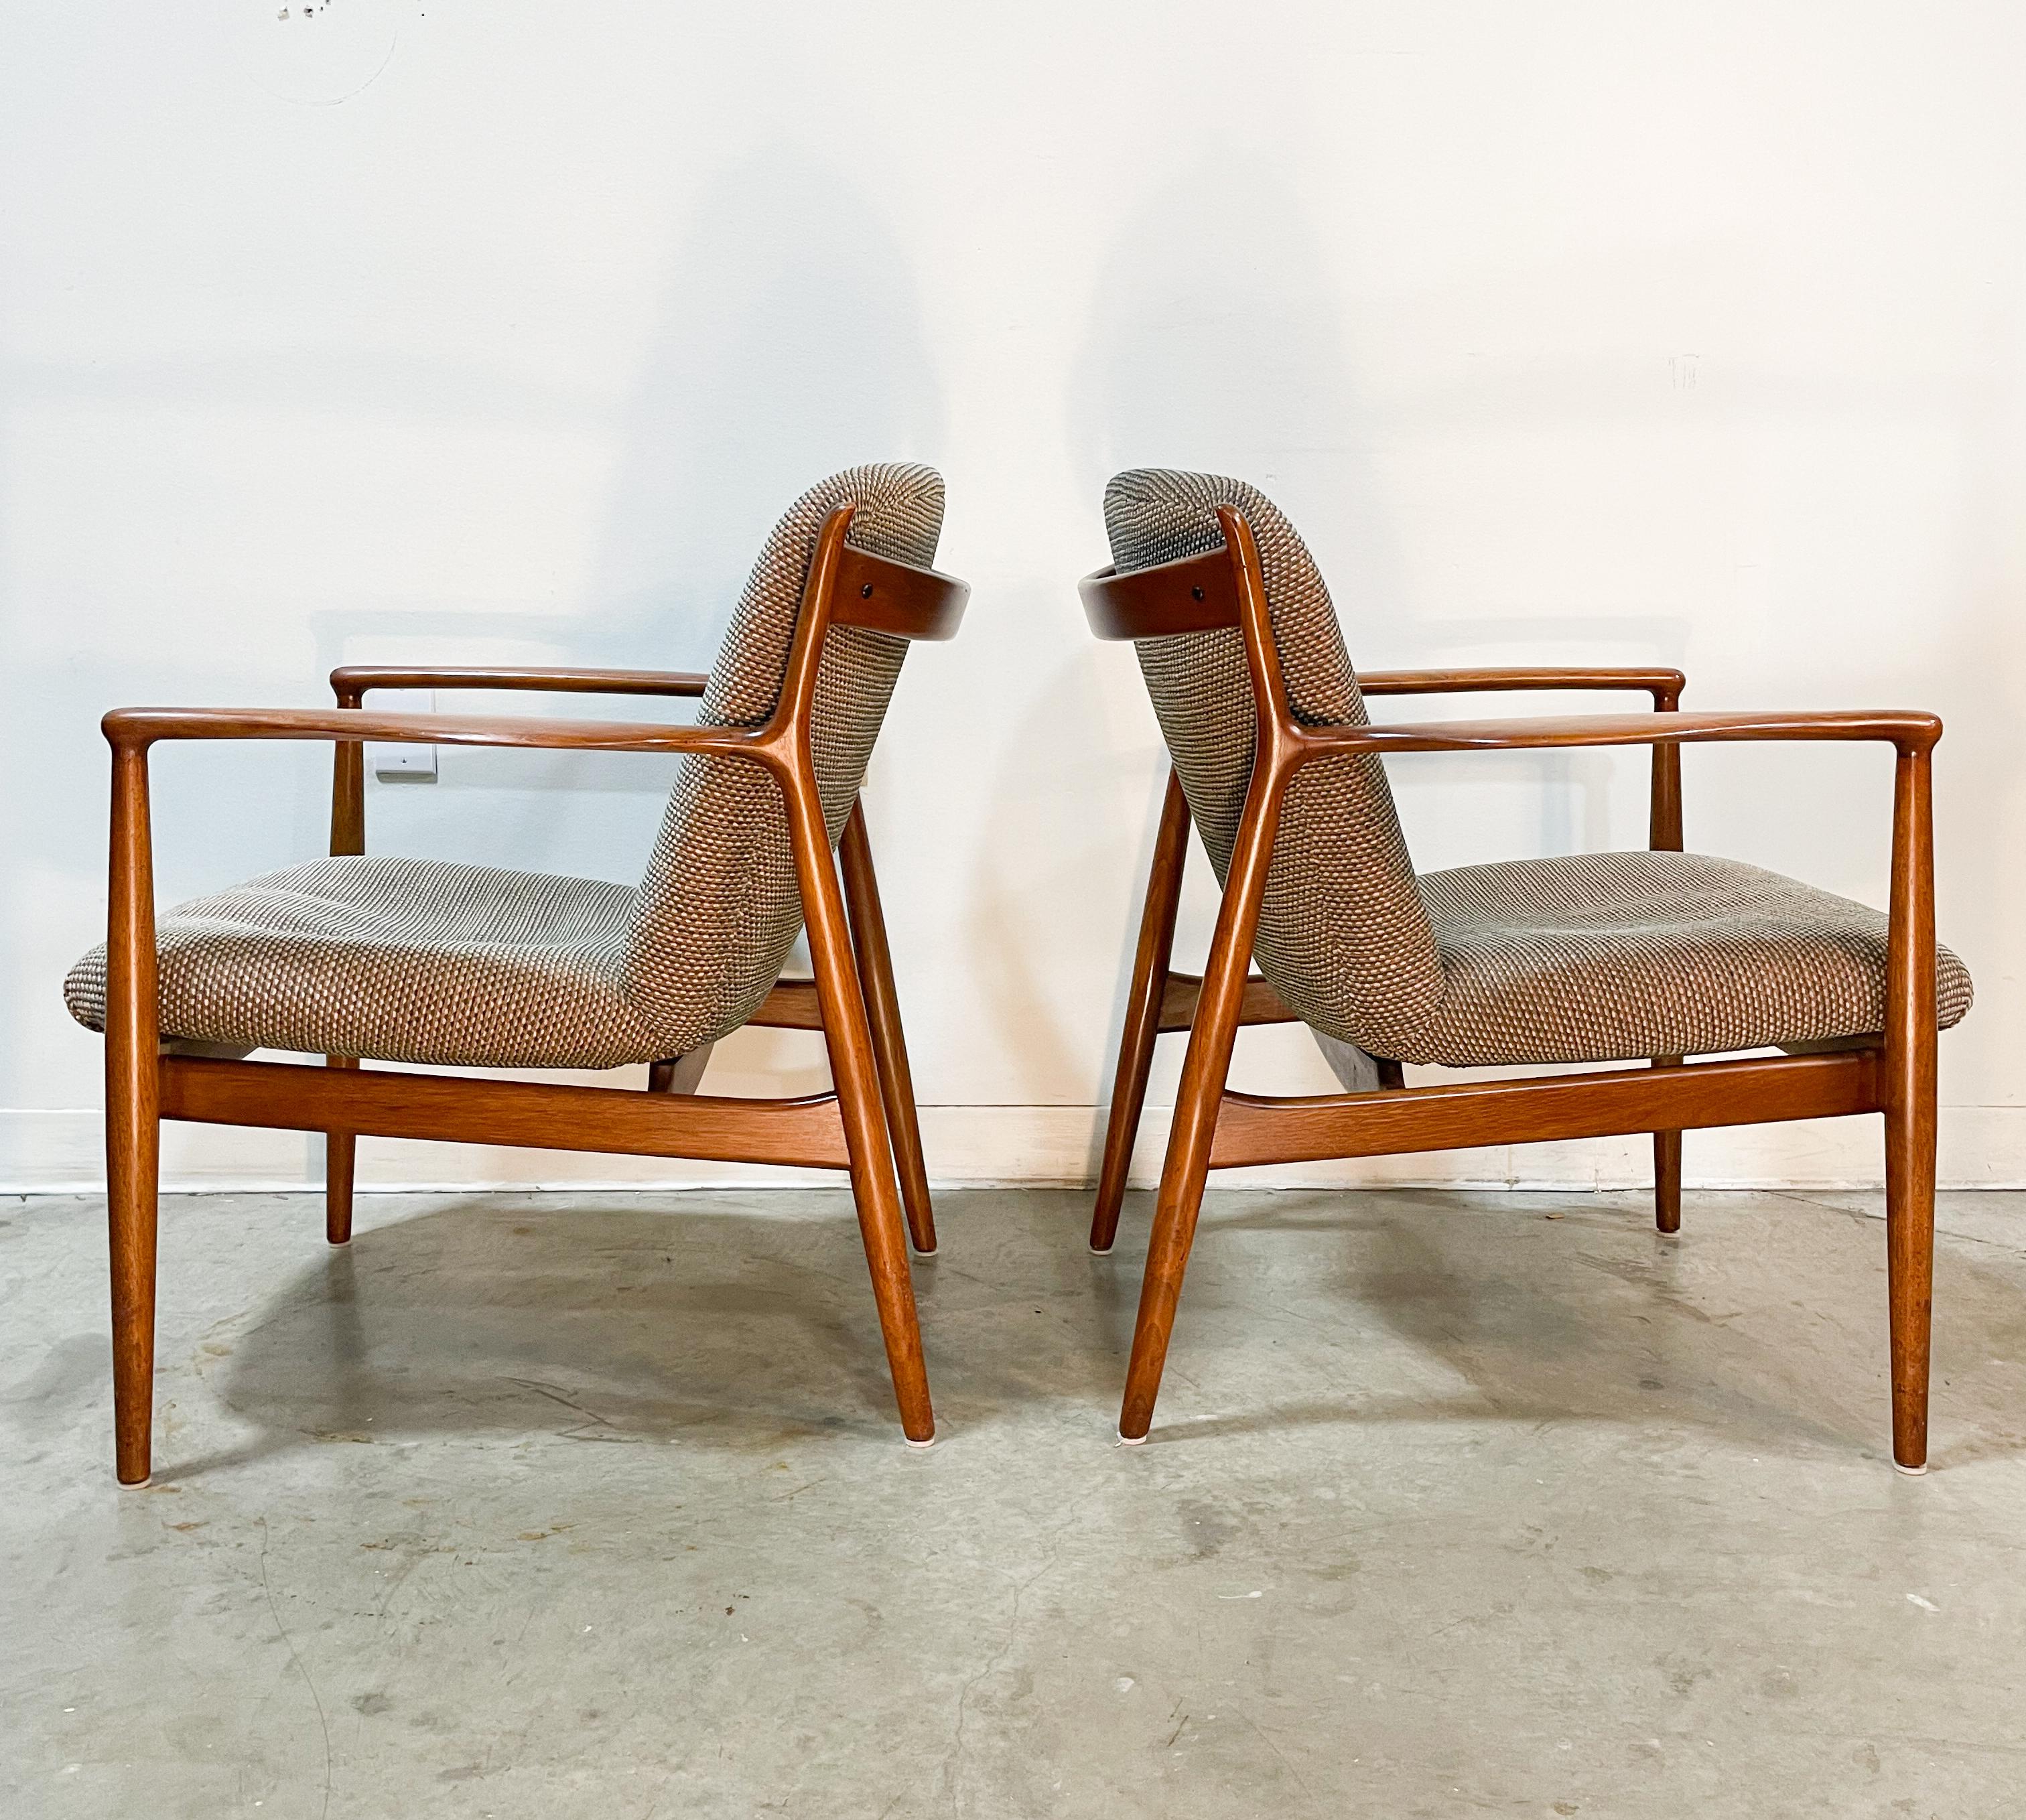 Stunning vintage 1950s production of Finn Juhl's superb design for Baker furniture. Technicaly known as the FJ51, the chair was also used by Delegates at the United Nations building in New York City, hence it's nickname 'Delegate'.
 
With its